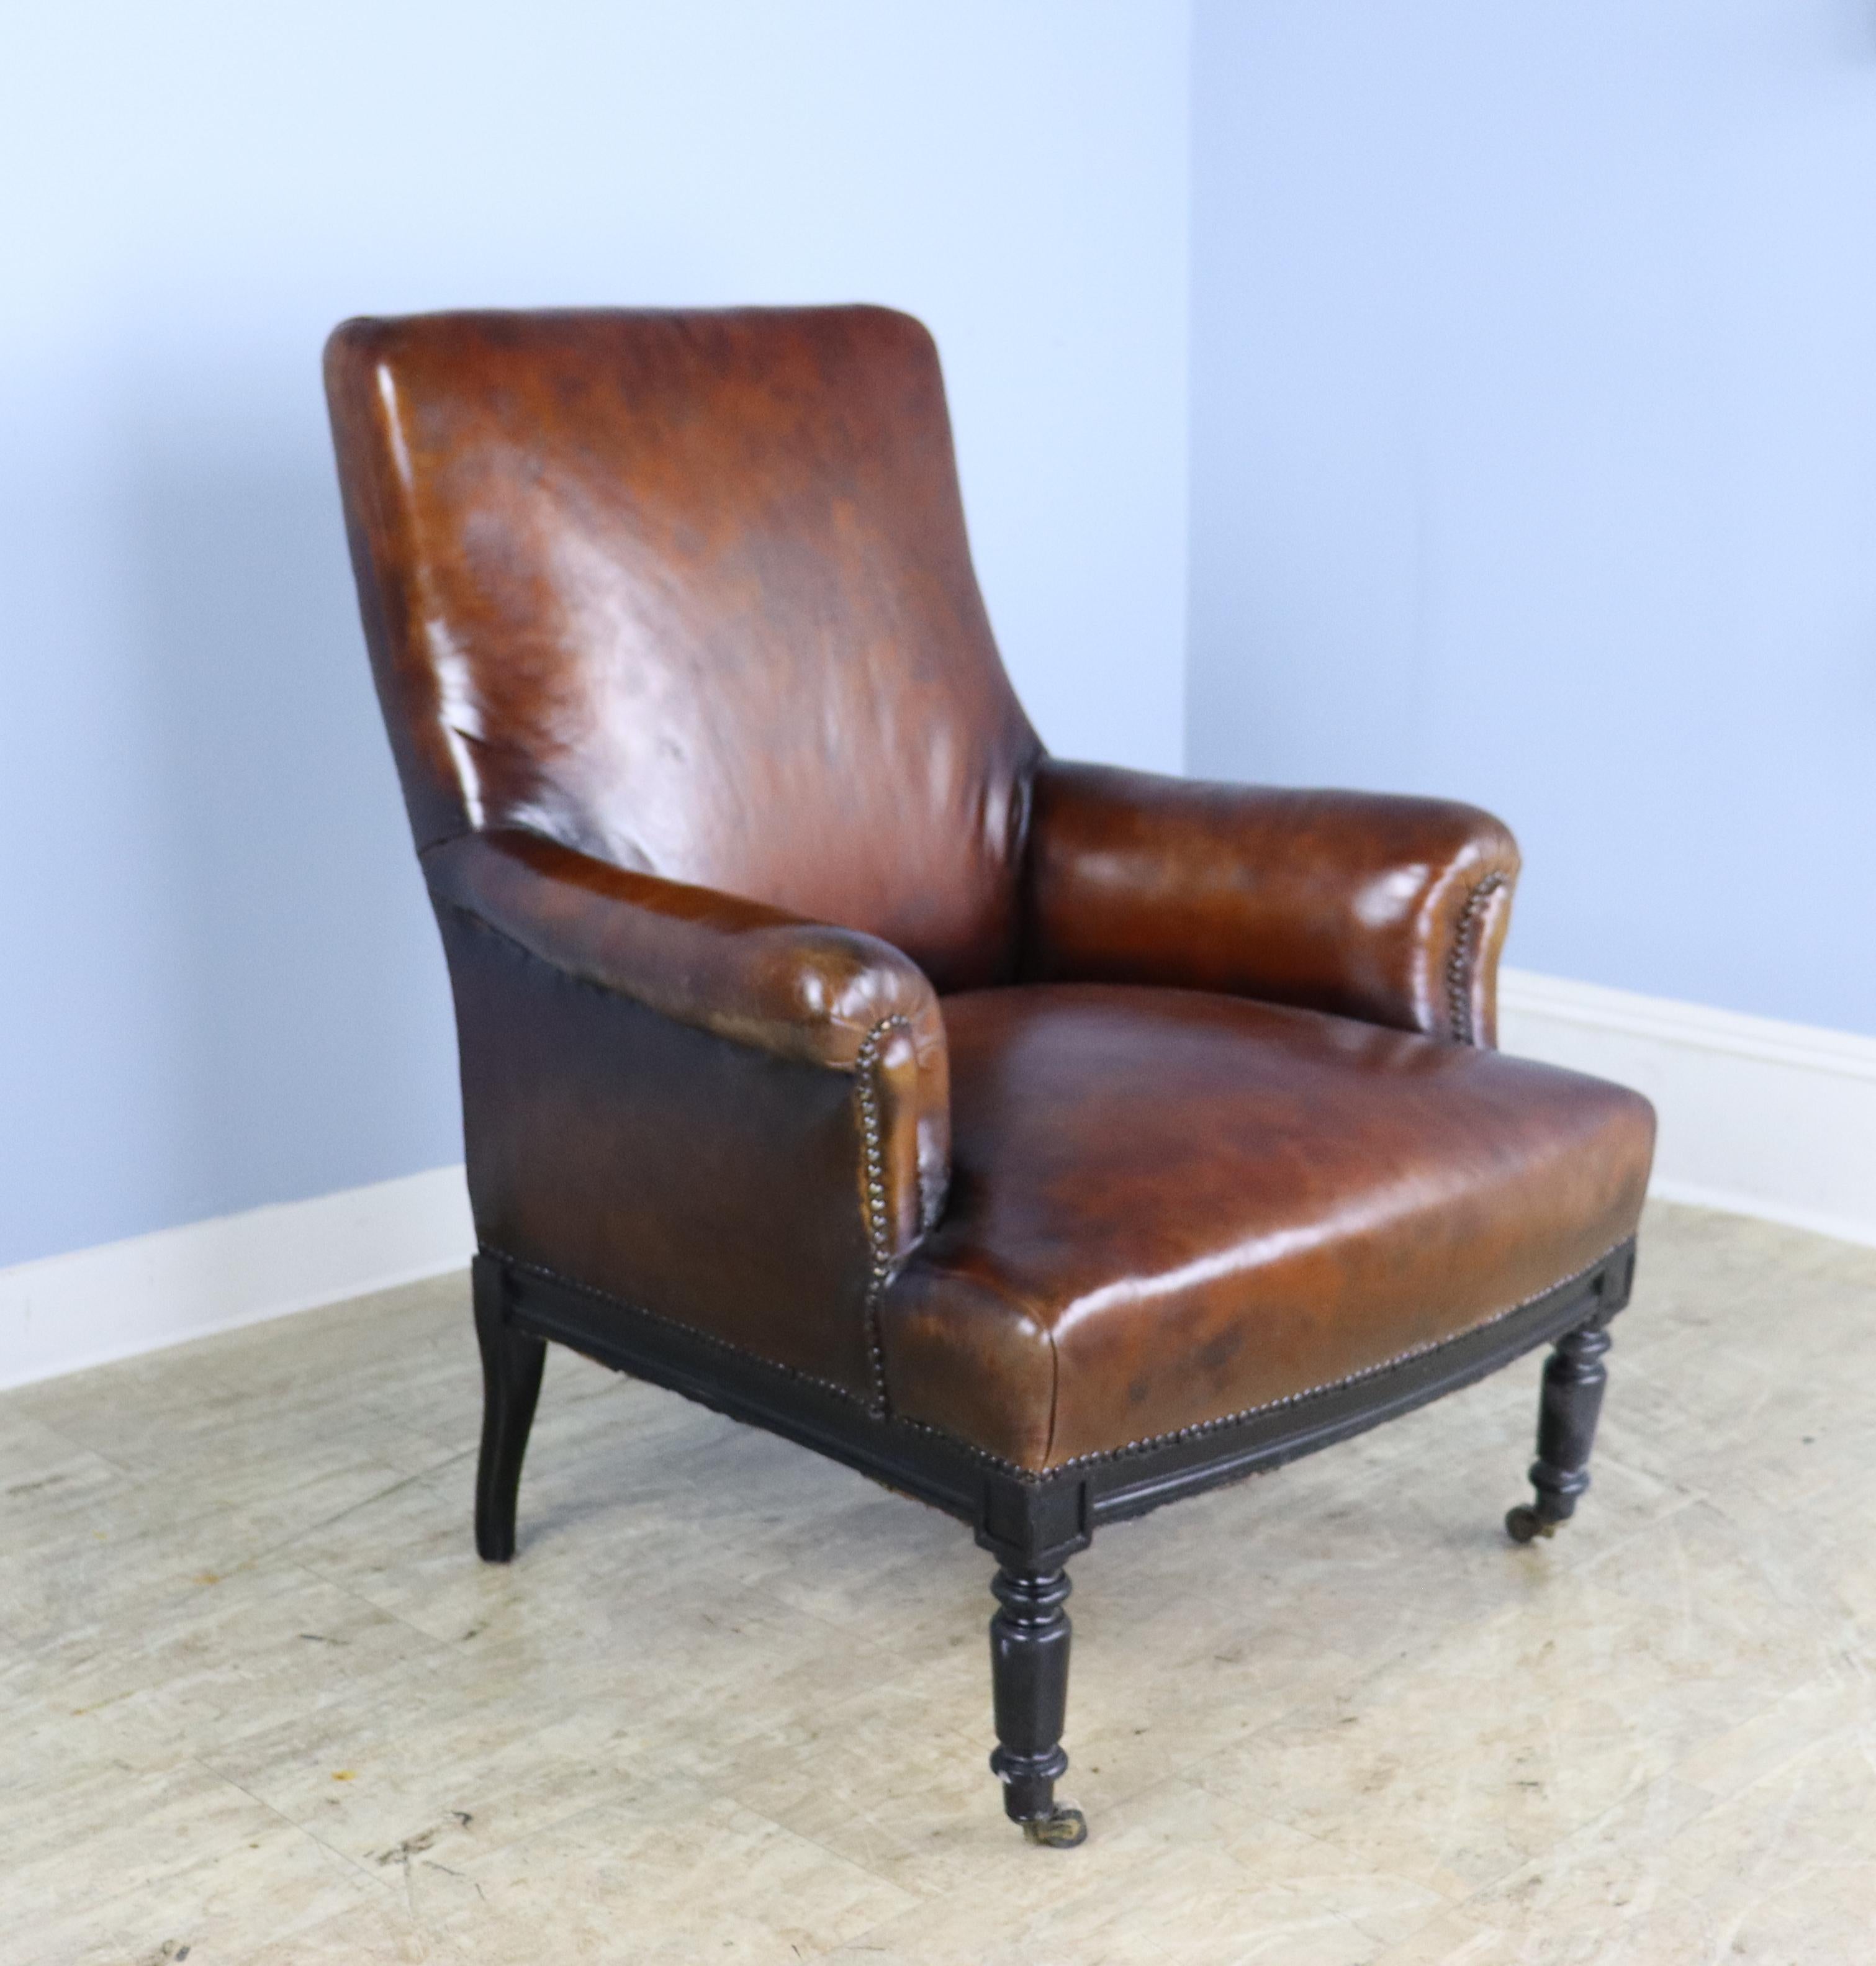 A handsome roomy armchair or clubchair in rich brown leather, in good condition for its age.  Nailheads are also in good shape.  Slightly reclined silhouette for comfoart and style.  